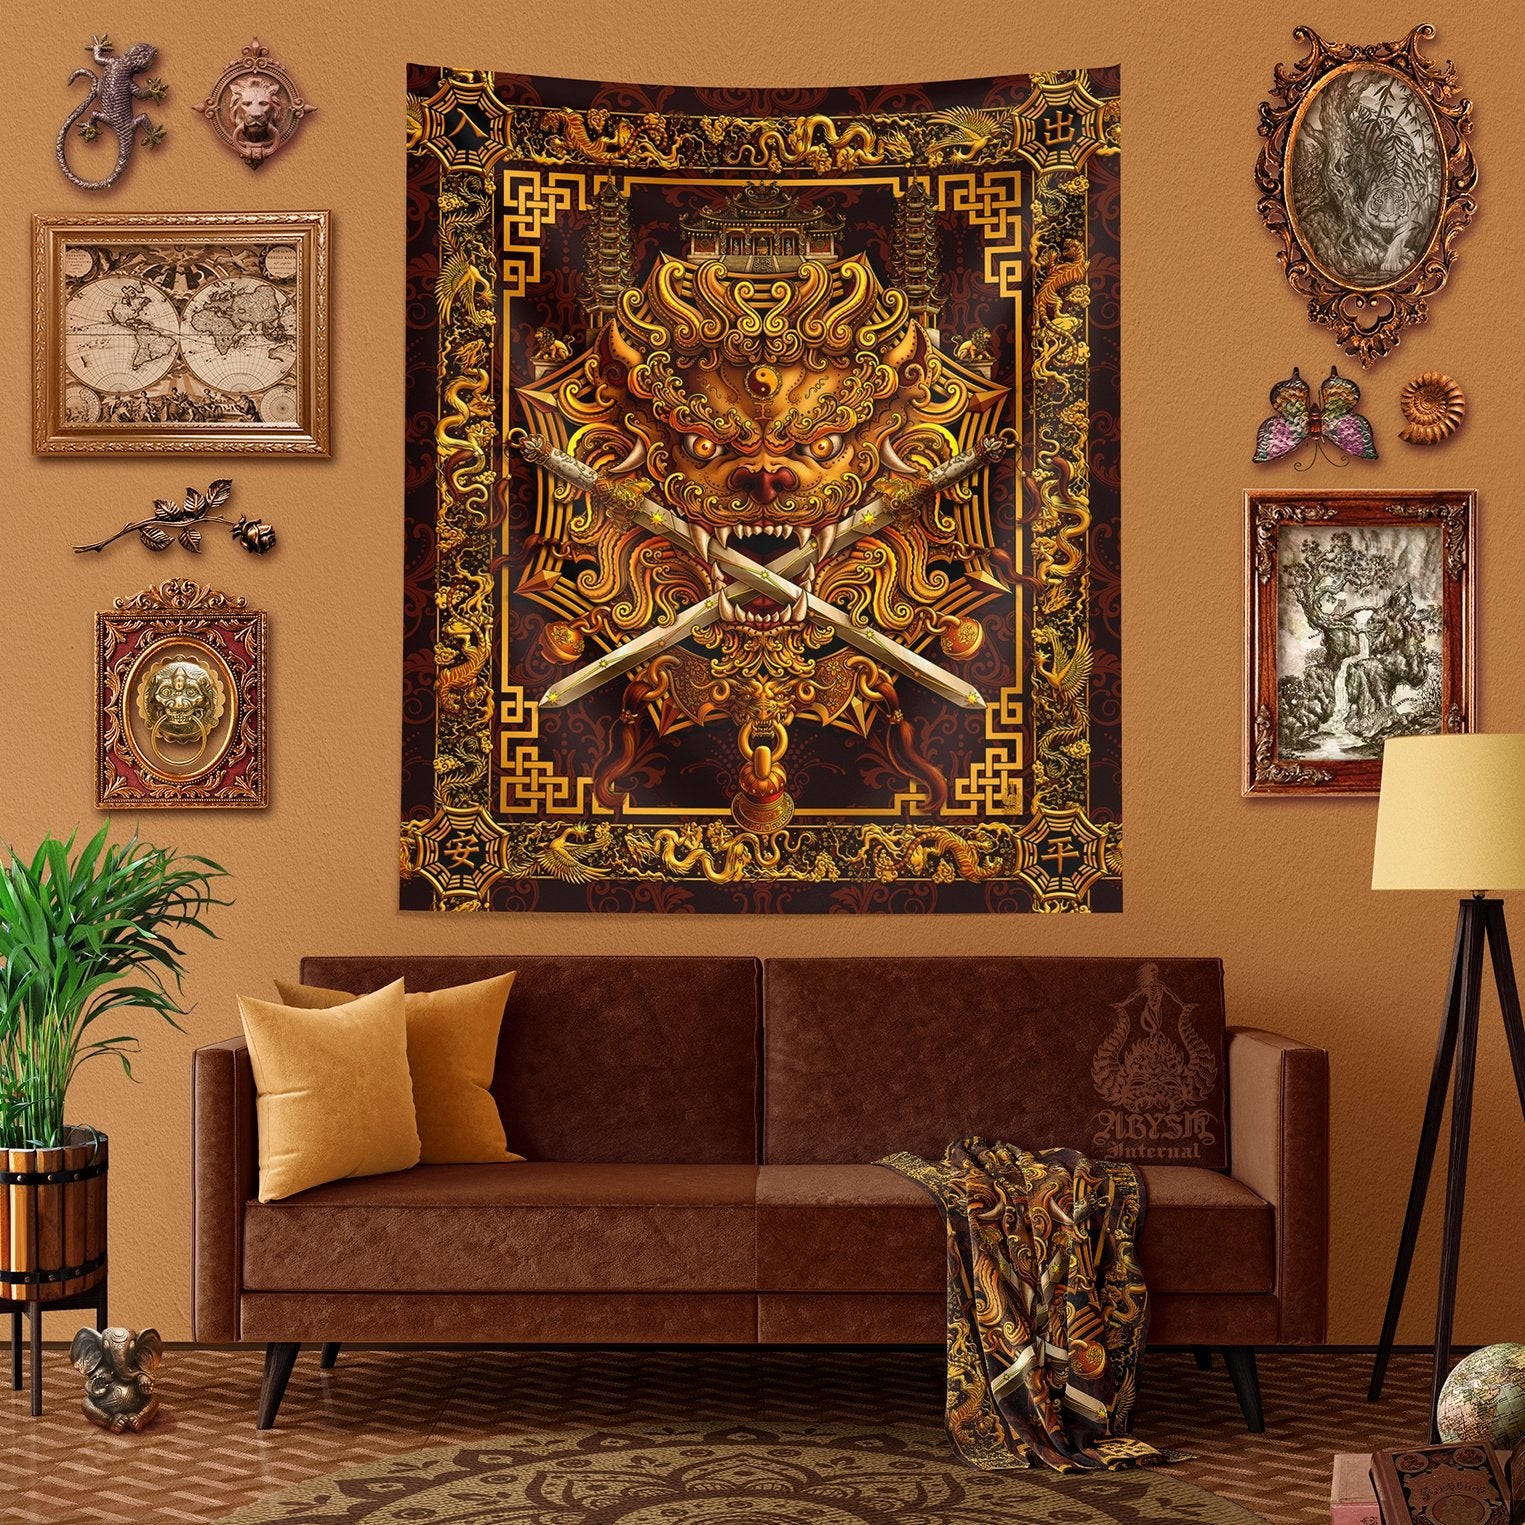 Lion Tapestry, Taiwan Sword Lion, Chinese Wall Hanging, Gamer Home Decor, Asian Mythology - Gold - Abysm Internal